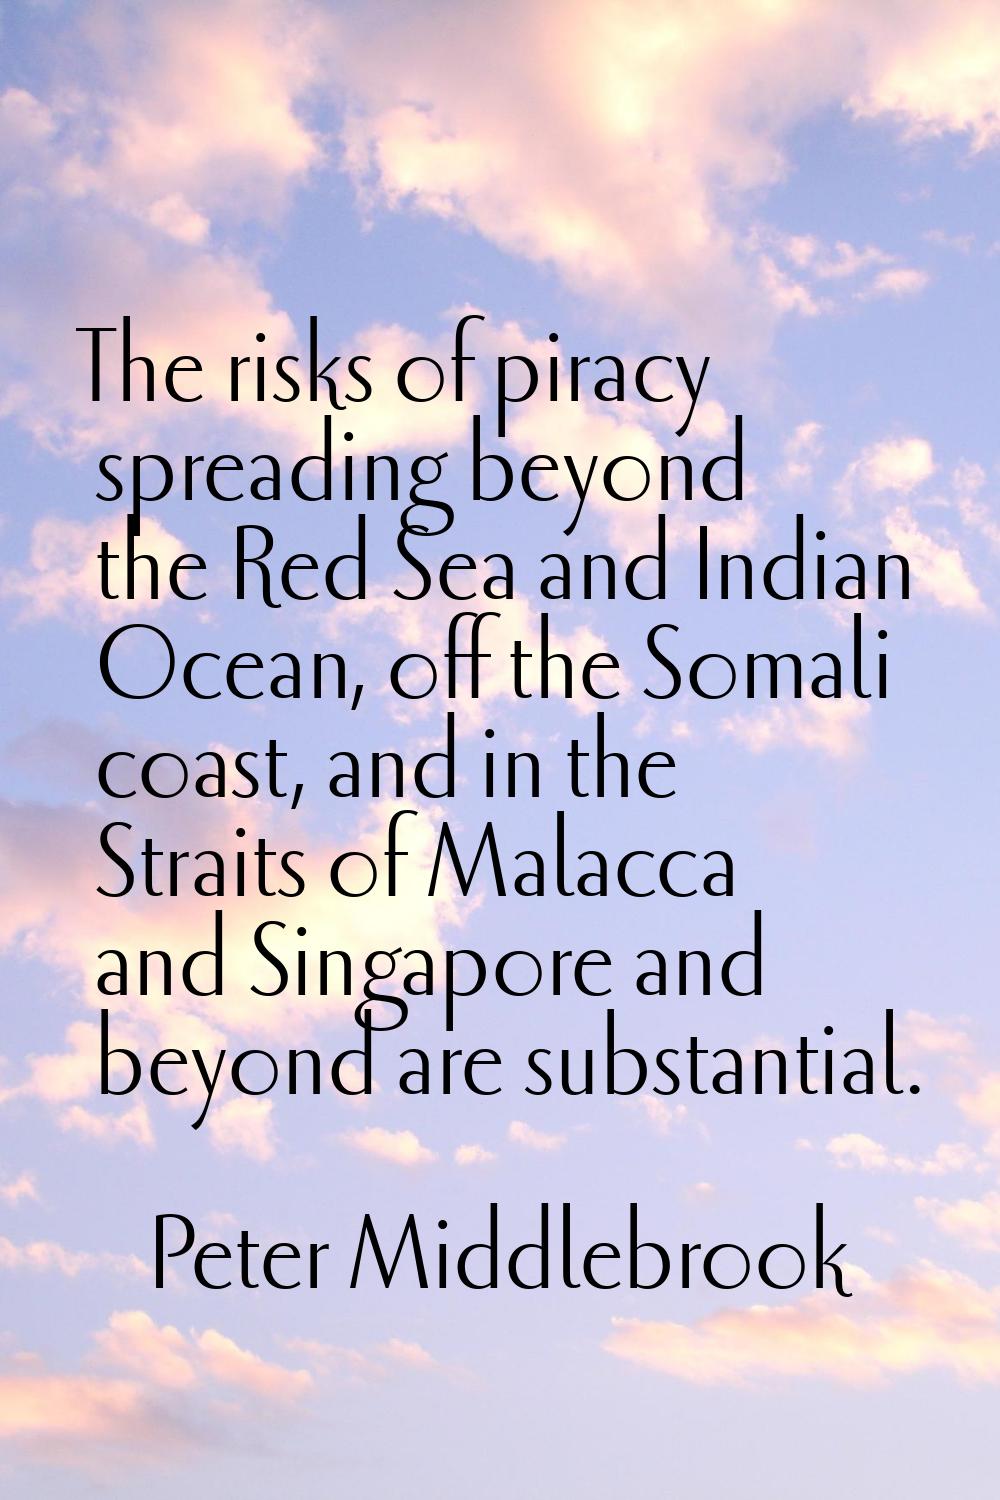 The risks of piracy spreading beyond the Red Sea and Indian Ocean, off the Somali coast, and in the